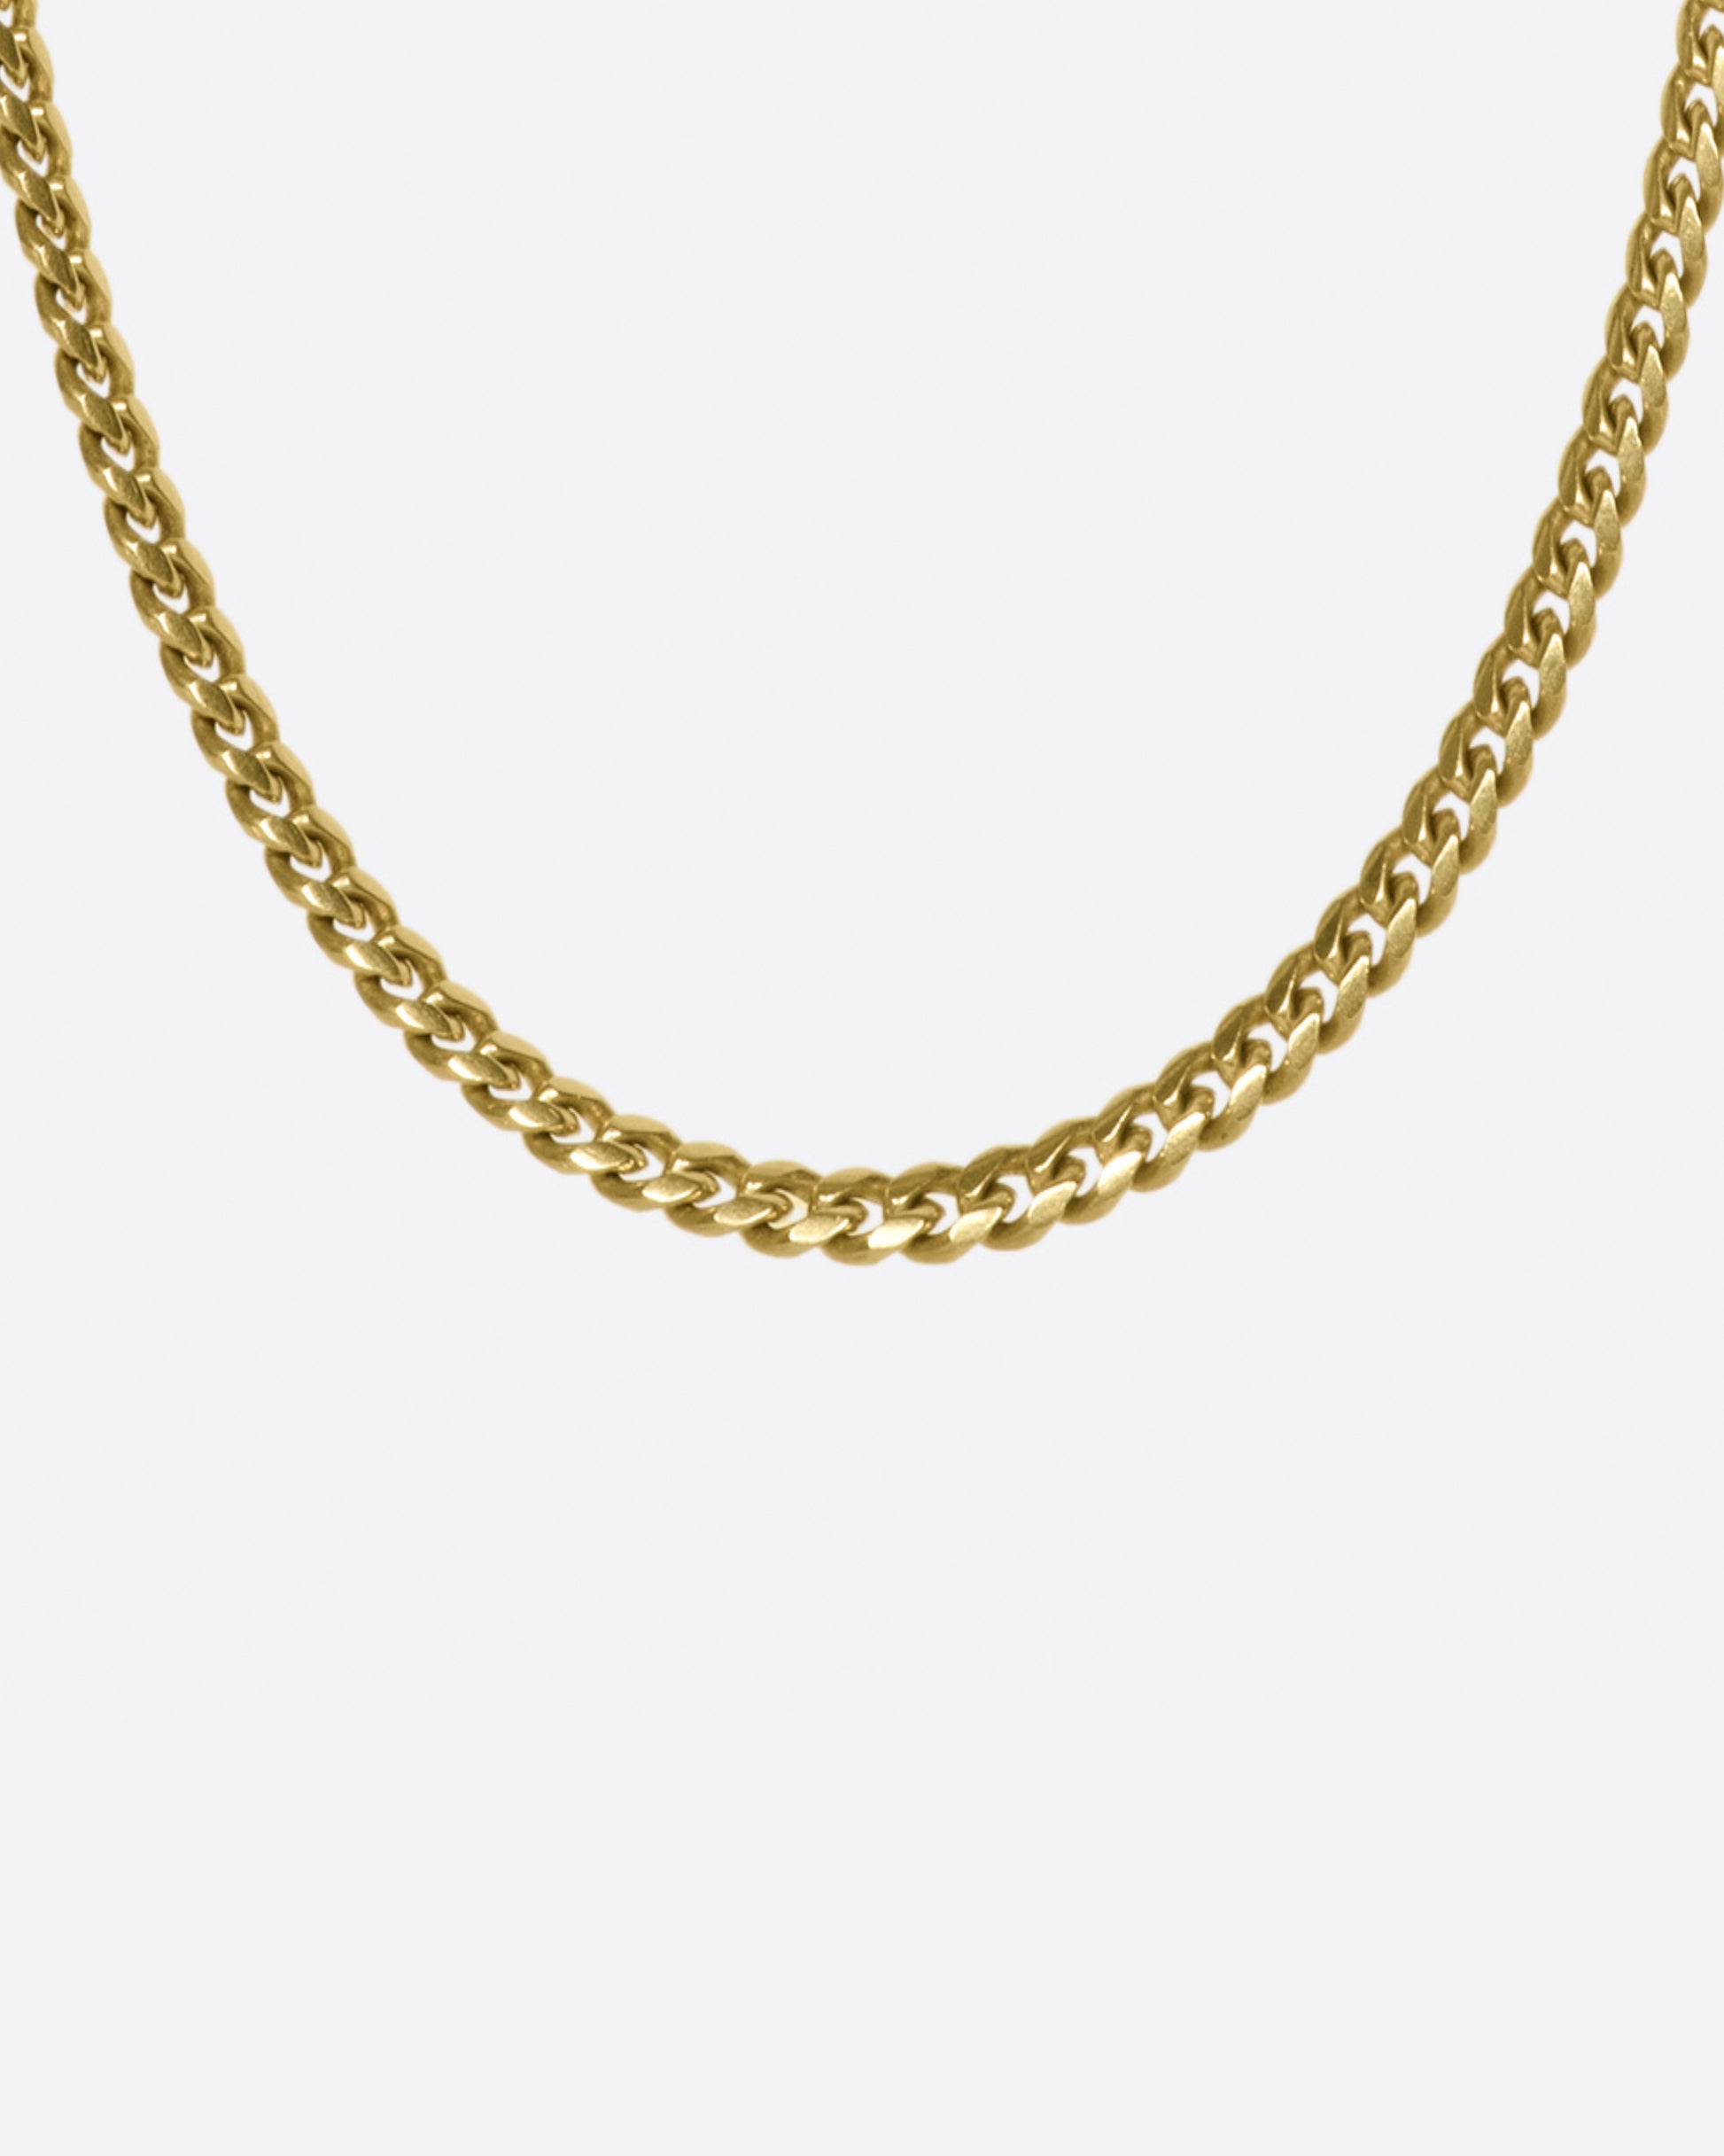 This solid chain is just narrow enough that it's comfortable for everyday wear, but still heavy and substantial.